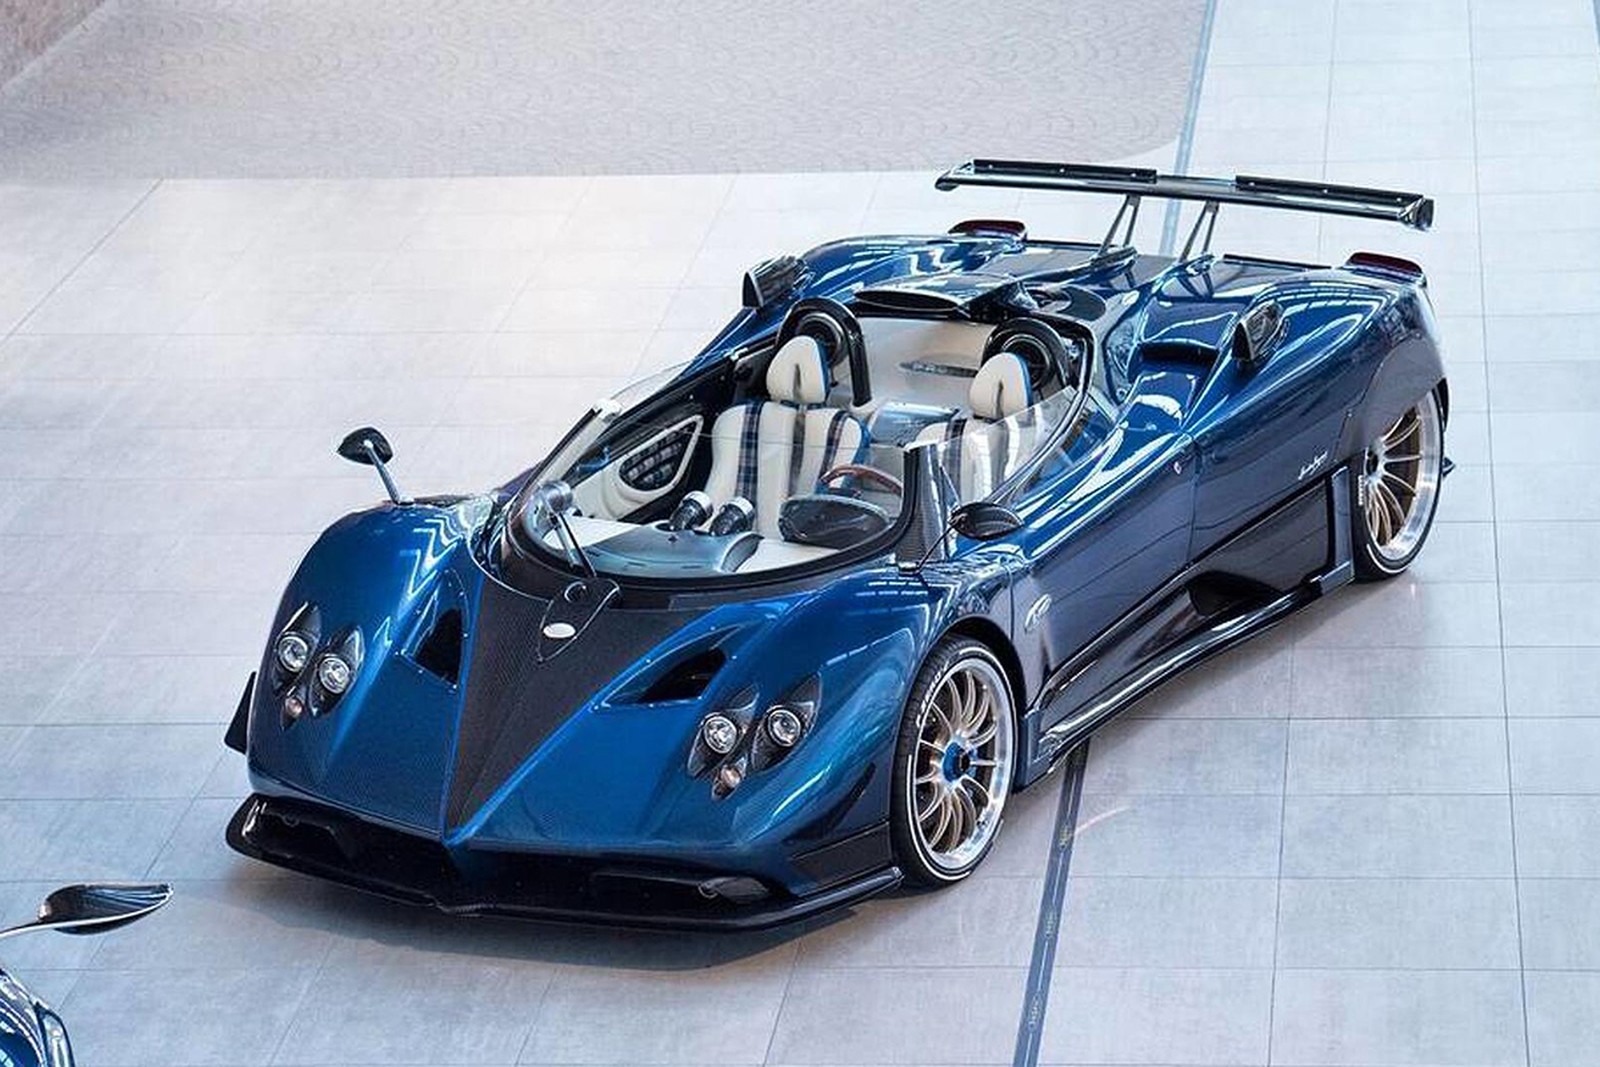 Check Out the Most Expensive Cars in the World